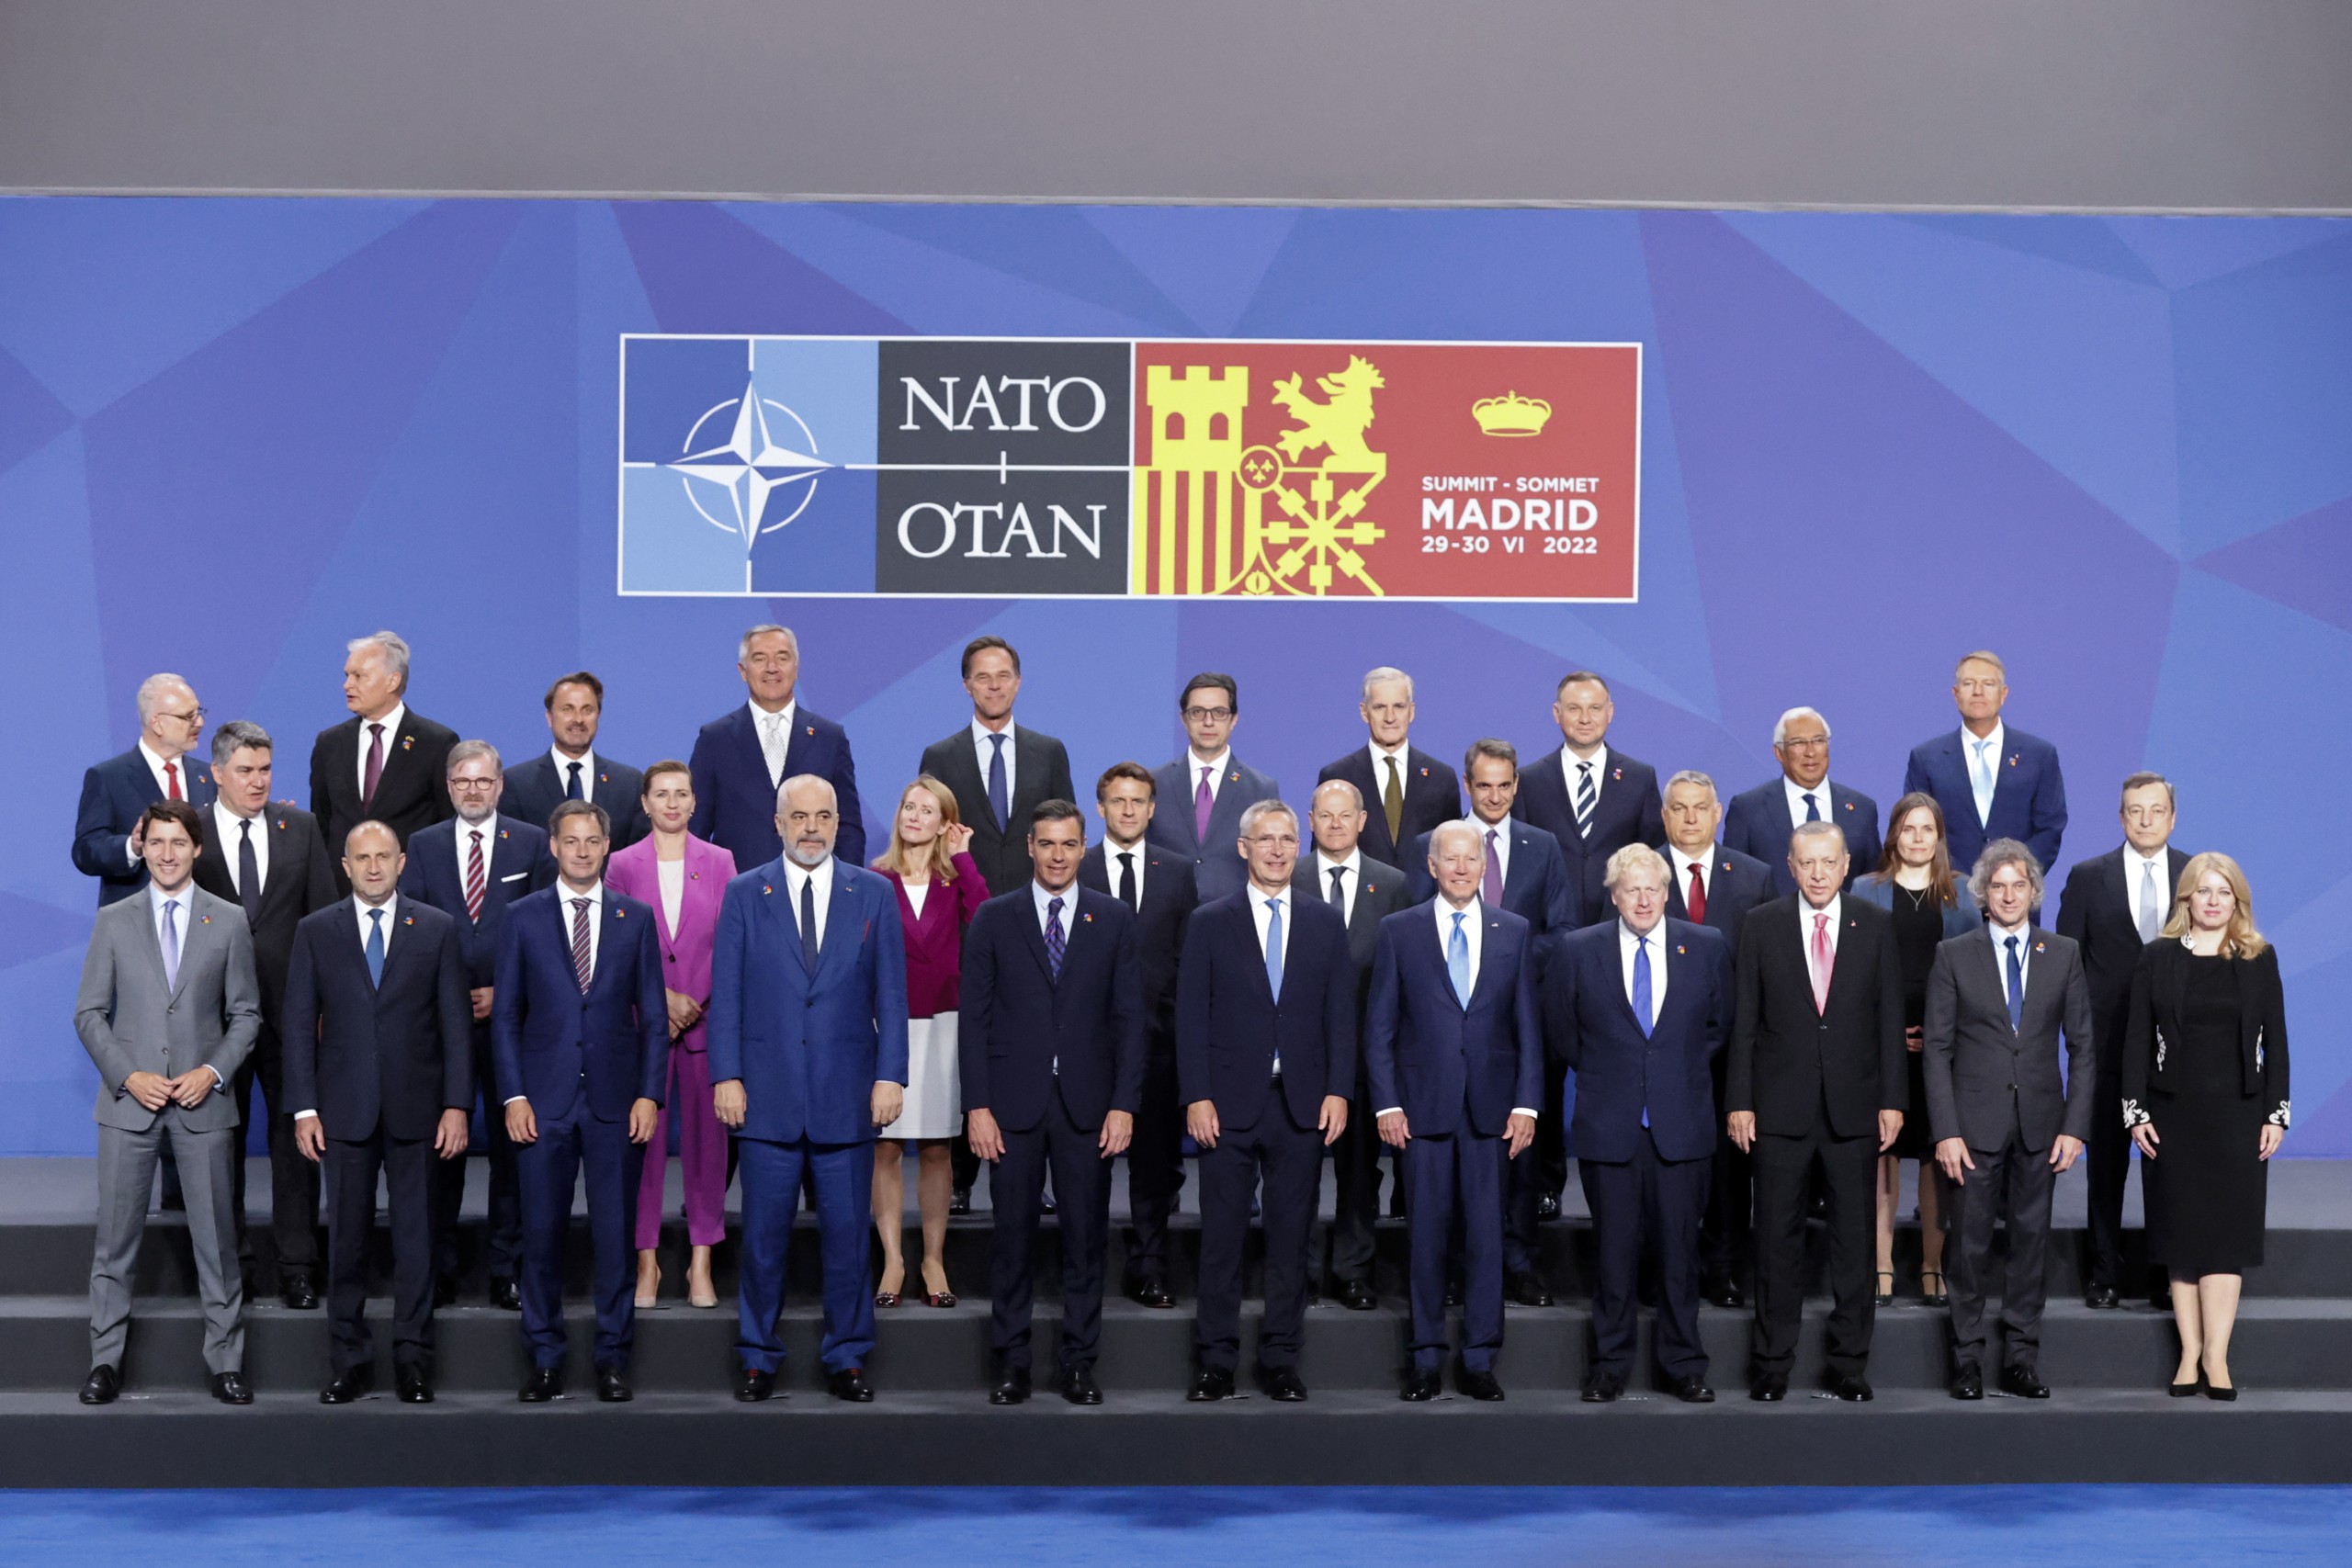 epa10040460 Spanish Prime Minister, Pedro Sanchez (first row, C-L), and NATO Secretary-General, Jens Stoltenberg (first row, C-R), pose for a family photo with the Heads of State and Government of NATO's member countries and key partners, on the first day of the NATO Summit at IFEMA Convention Center, in Madrid, Spain, 29 June 2022. Heads of State and Government of NATO's member countries and key partners are gathering in Madrid from 29 to 30 June to discuss security concerns like Russia's invasion of Ukraine and other challenges. Spain is hosting 2022 NATO Summit coinciding with the 40th anniversary of its accession to NATO.  EPA/Brais Lorenzo